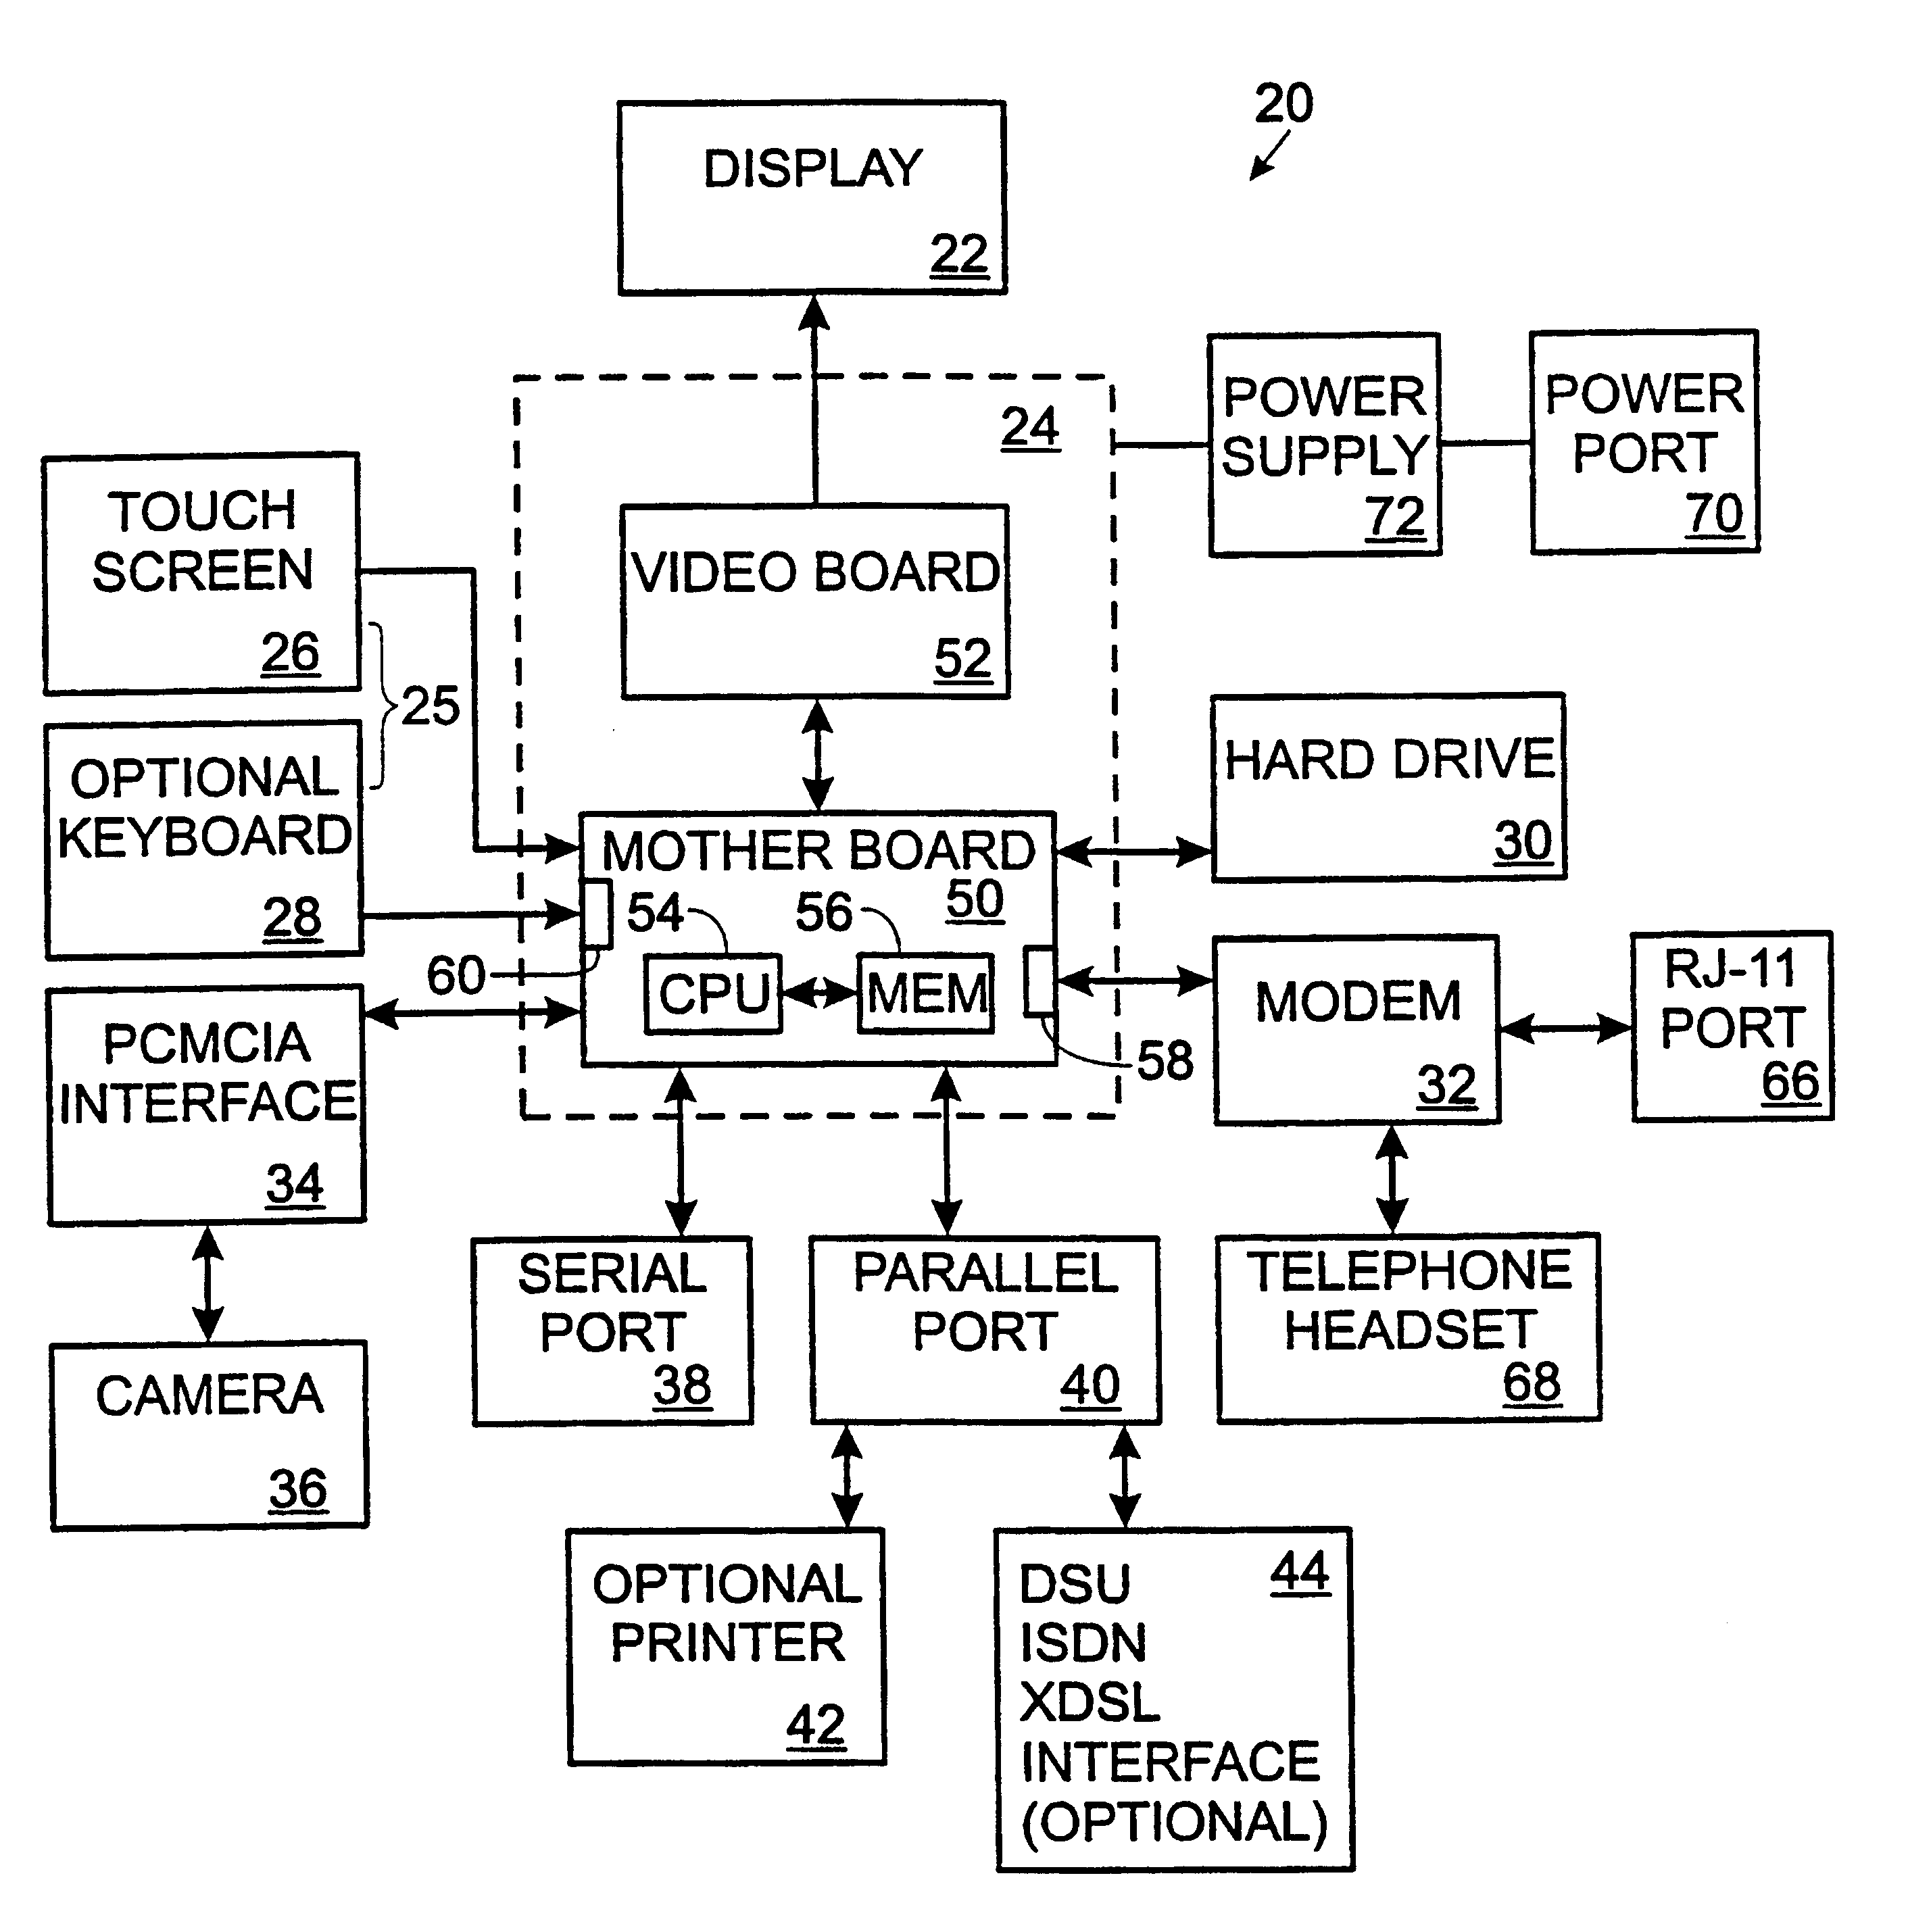 Mobile telecommunication device for simultaneously transmitting and receiving sound and image data